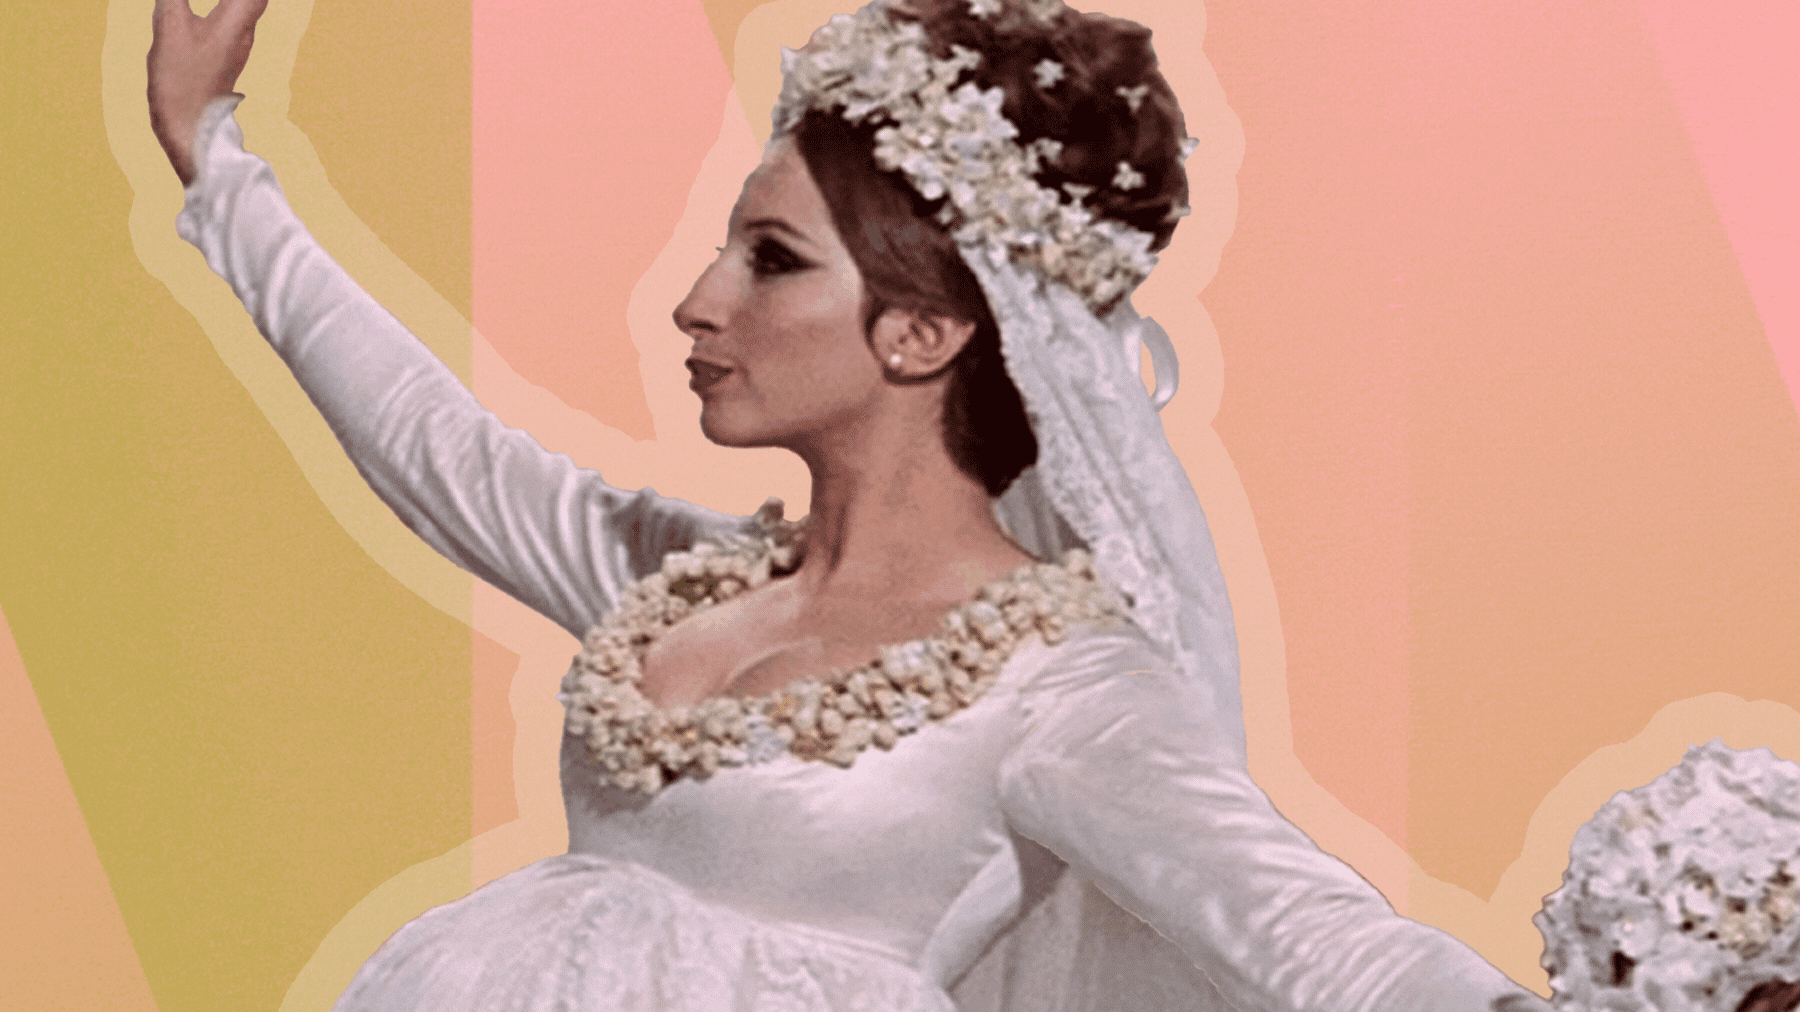 With <i>I Can Get It For You Wholesale</i>, a pattern of artistic concerns and critical reception emerged that would shape Streisand's public persona for decades. 
